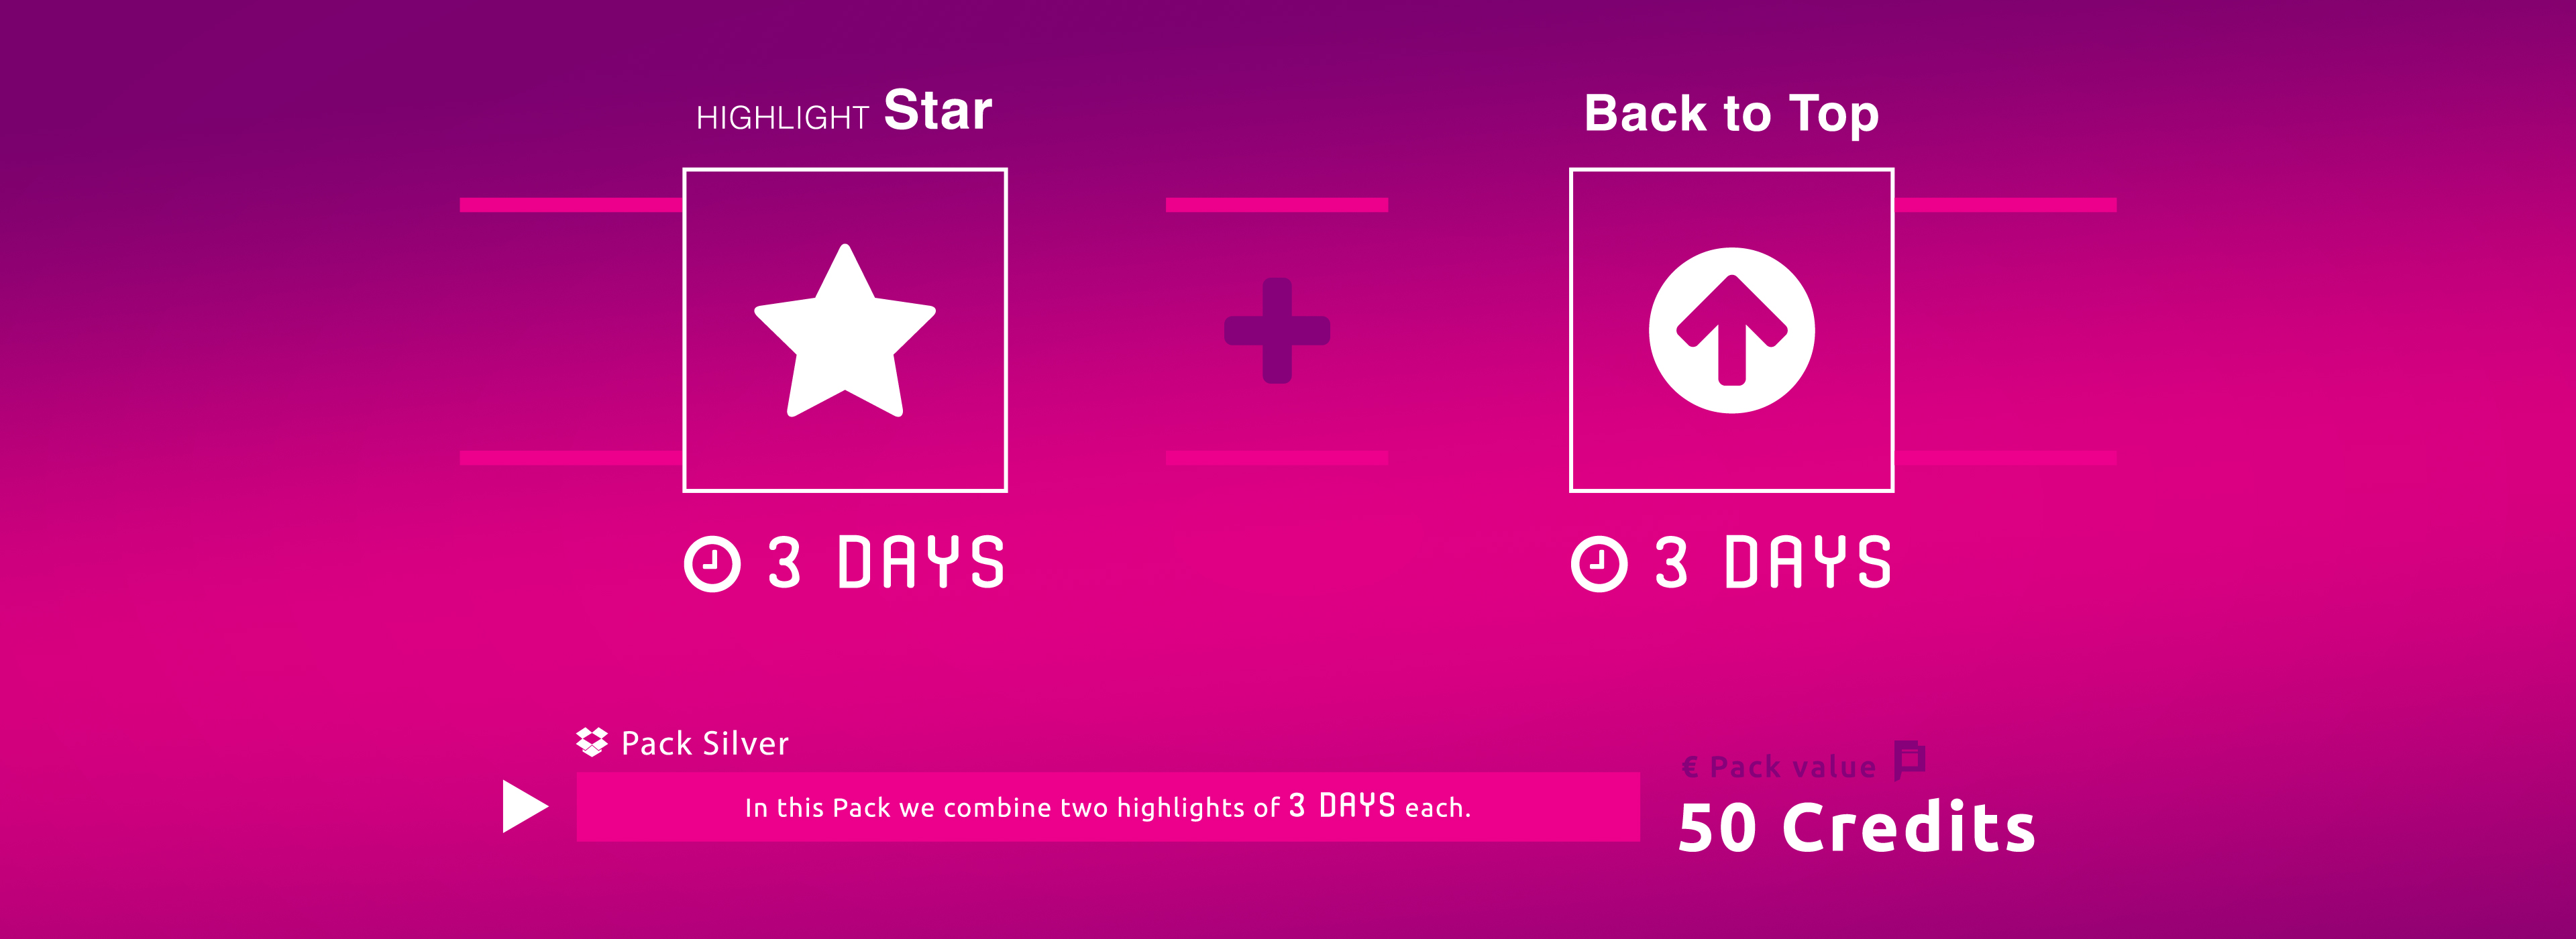 With Silver Pack your ad will be published with 1 Star Highlight for 3 days plus 1 Back to Top Highlights for 3 days. For the total valid period of 6 days your ad will always be highlighted.